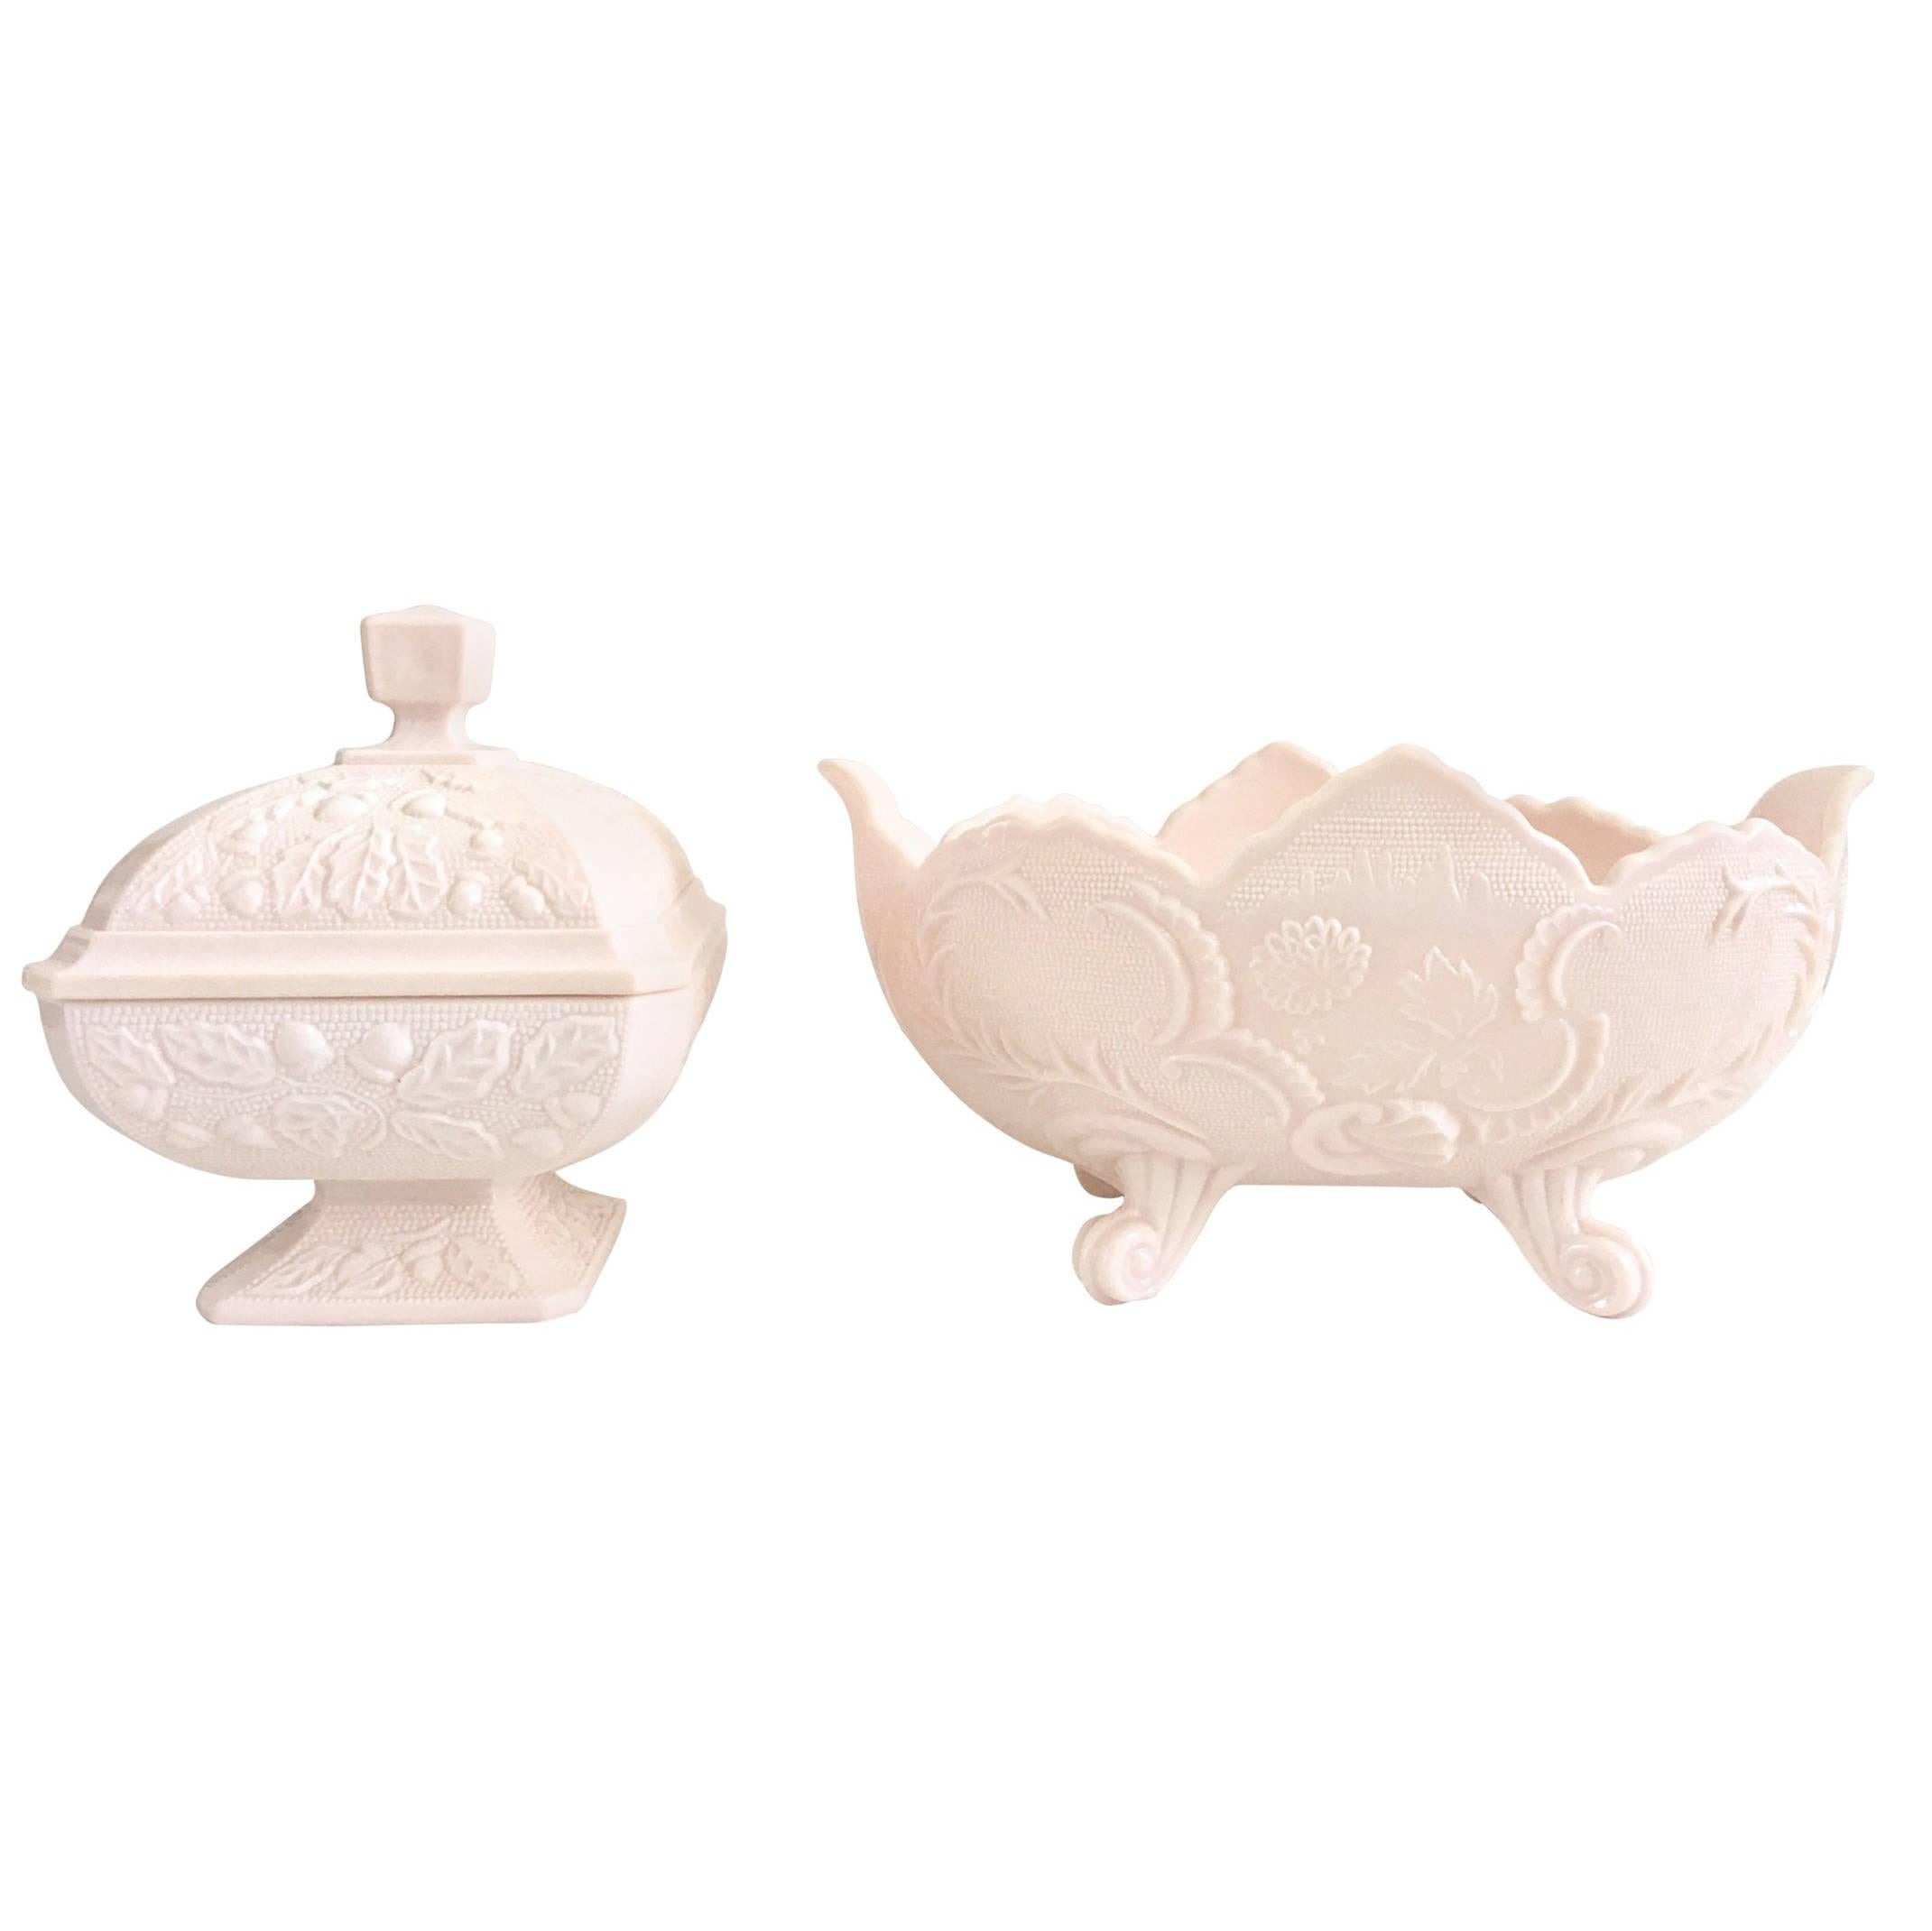 Midcentury set of two pieces American pink milk glass, lidded candy dish and footed oval bowl.
The lidded and footed candy dish features a raised hob nail, acorn and leaf pattern, the large oval footed bowl features a scroll and shell motif.
The